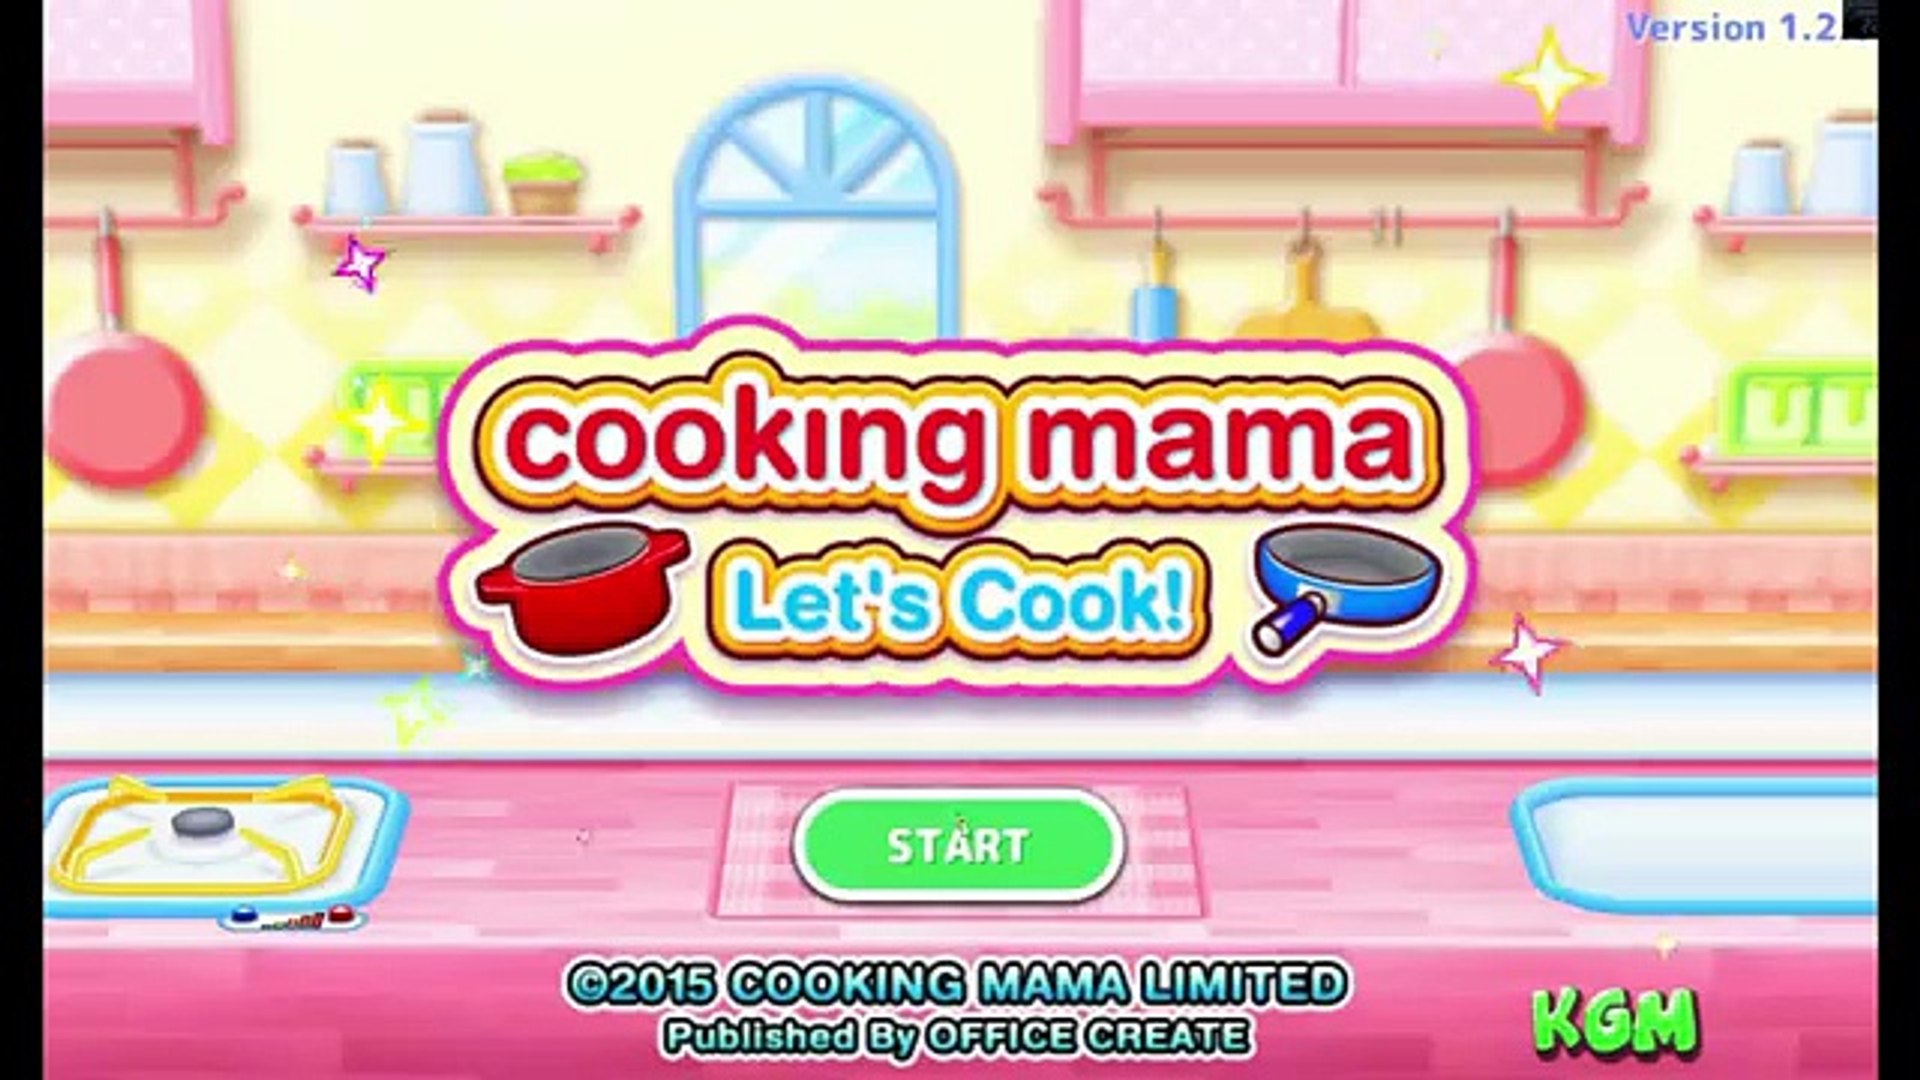 Cooking Mama Cooking Video Game